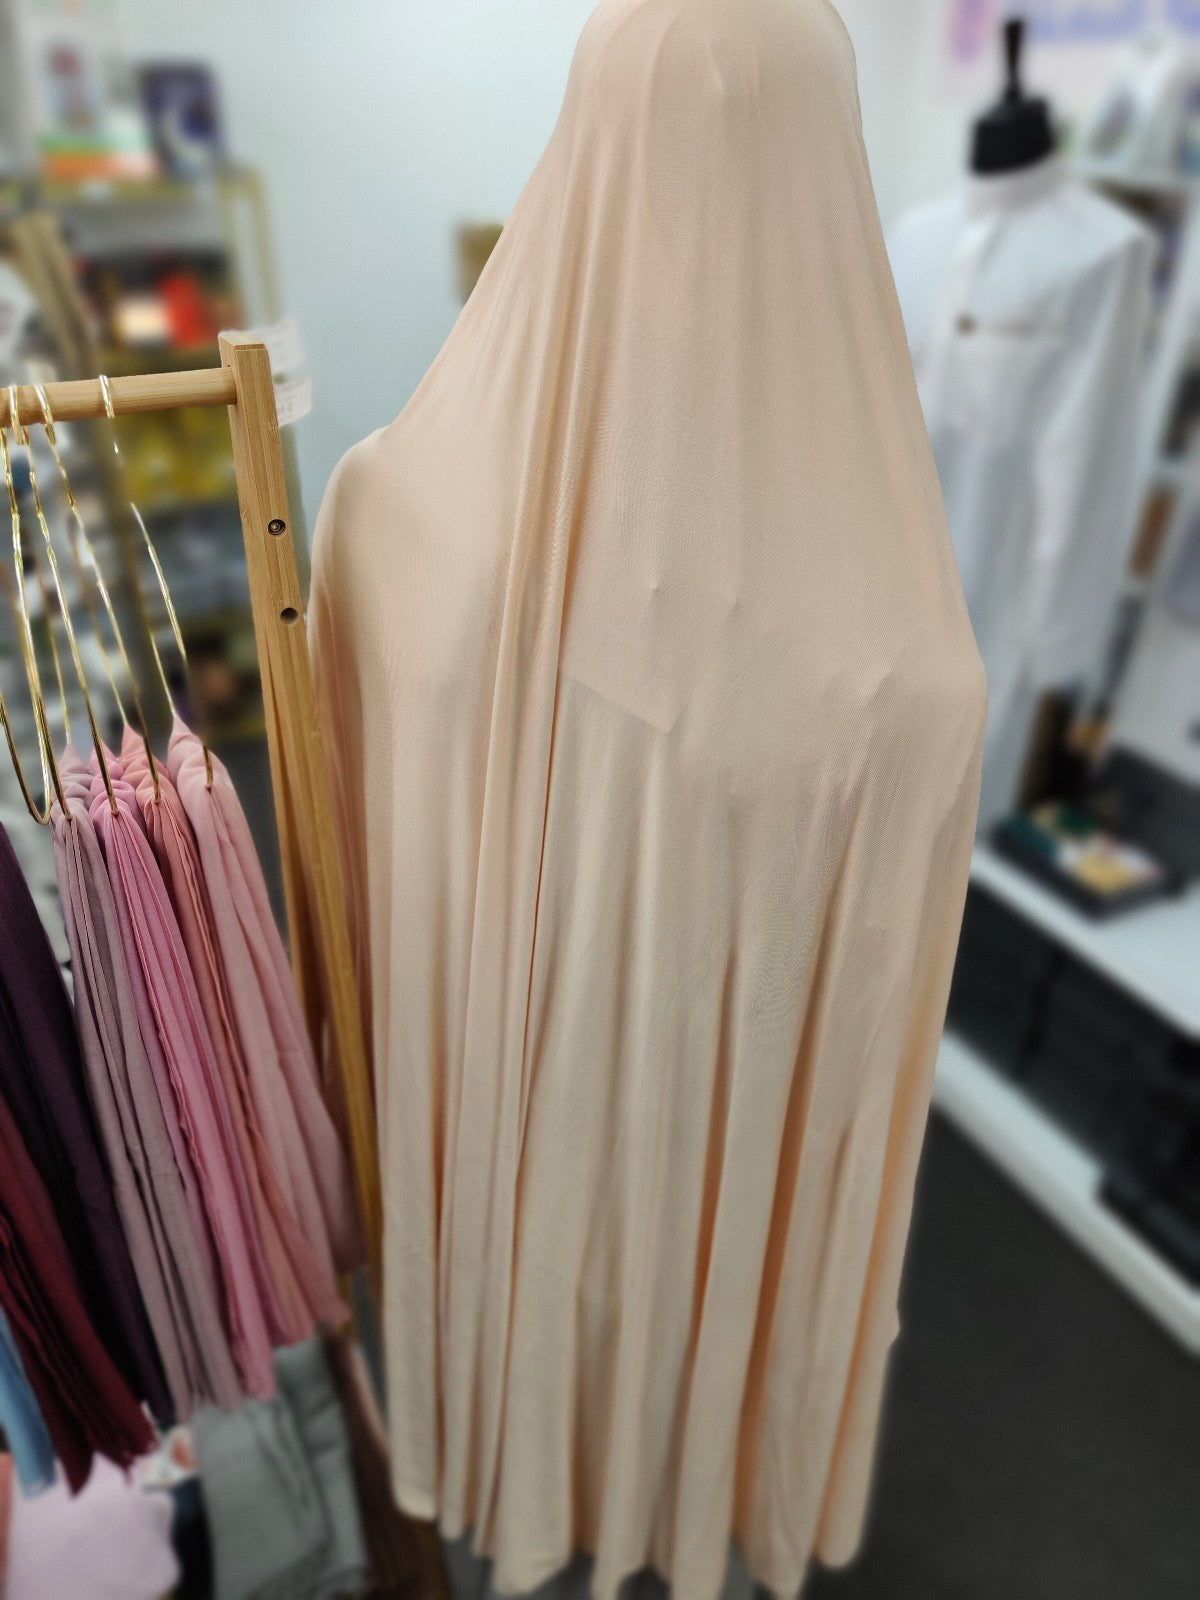 Discover unparalleled comfort with our Cream Bamboo Jilbab. Lightweight, breathable, and perfect for summer. Perfect for Summer! Lightweight, Breathable, Cool Bamboo Jilbab in Cream for Hot Weather. Buy the best Bamboo Jilbab online. Ideal for hot weather. Elevate your style at Hikmah Boutique. 